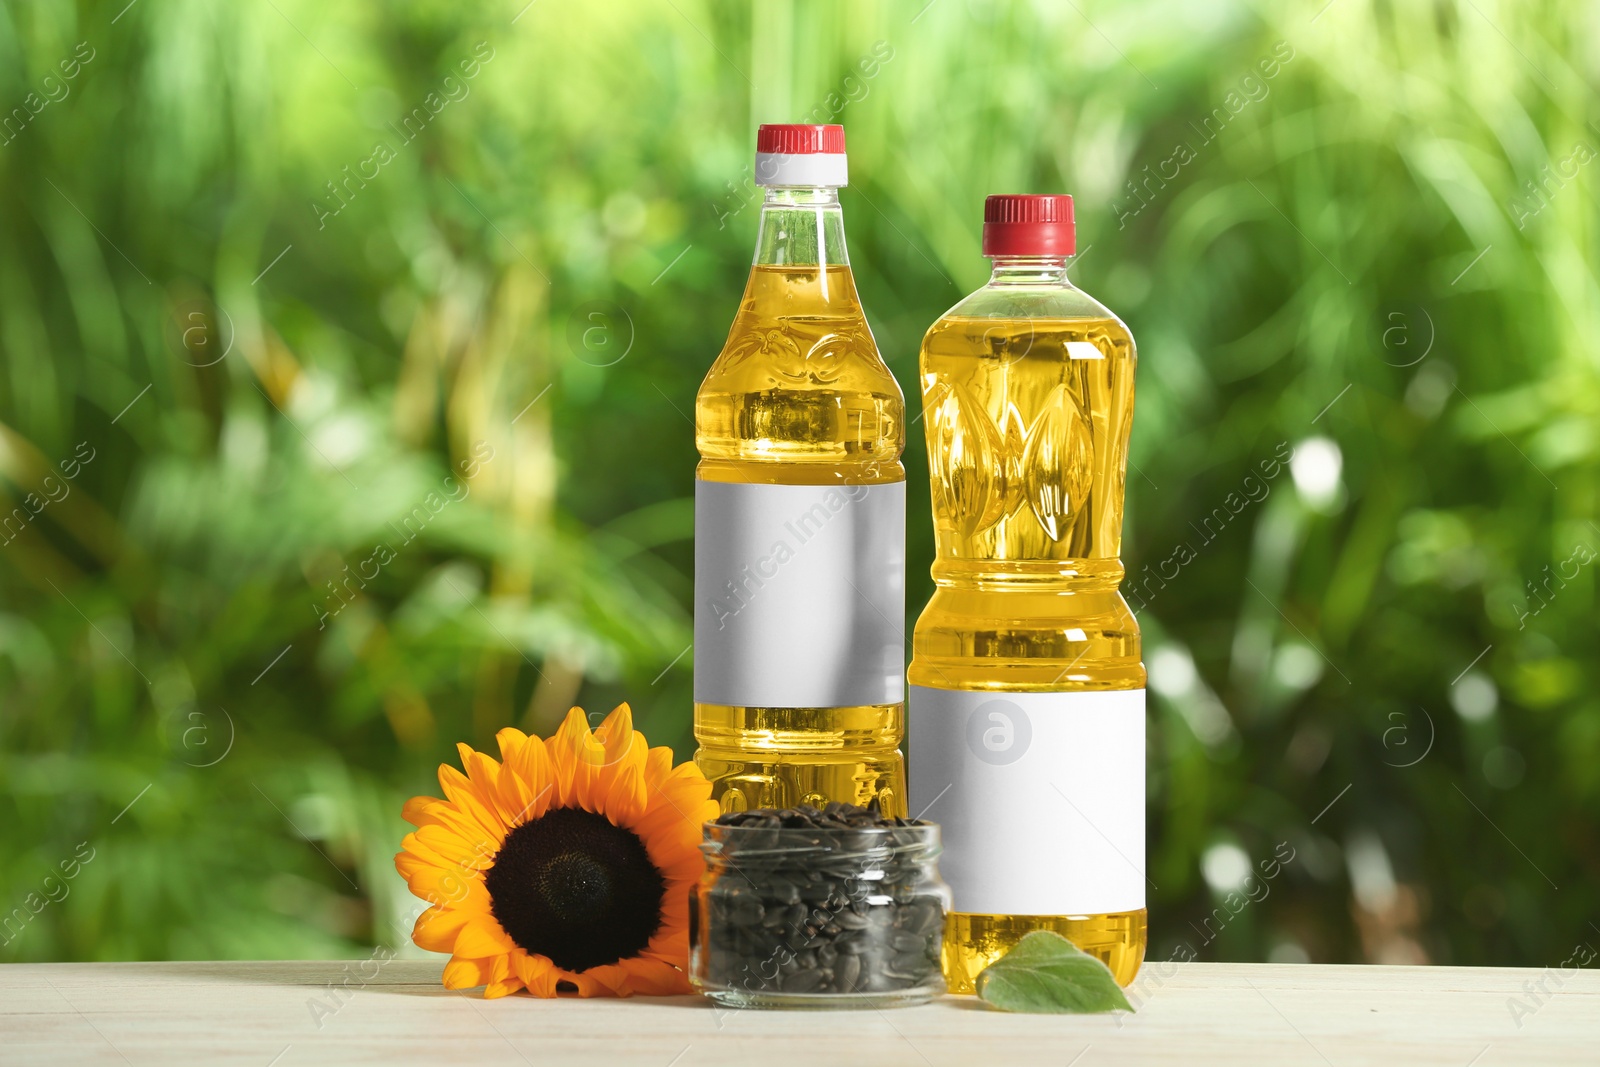 Photo of Bottles of sunflower cooking oil, seeds and yellow flower on white wooden table outdoors